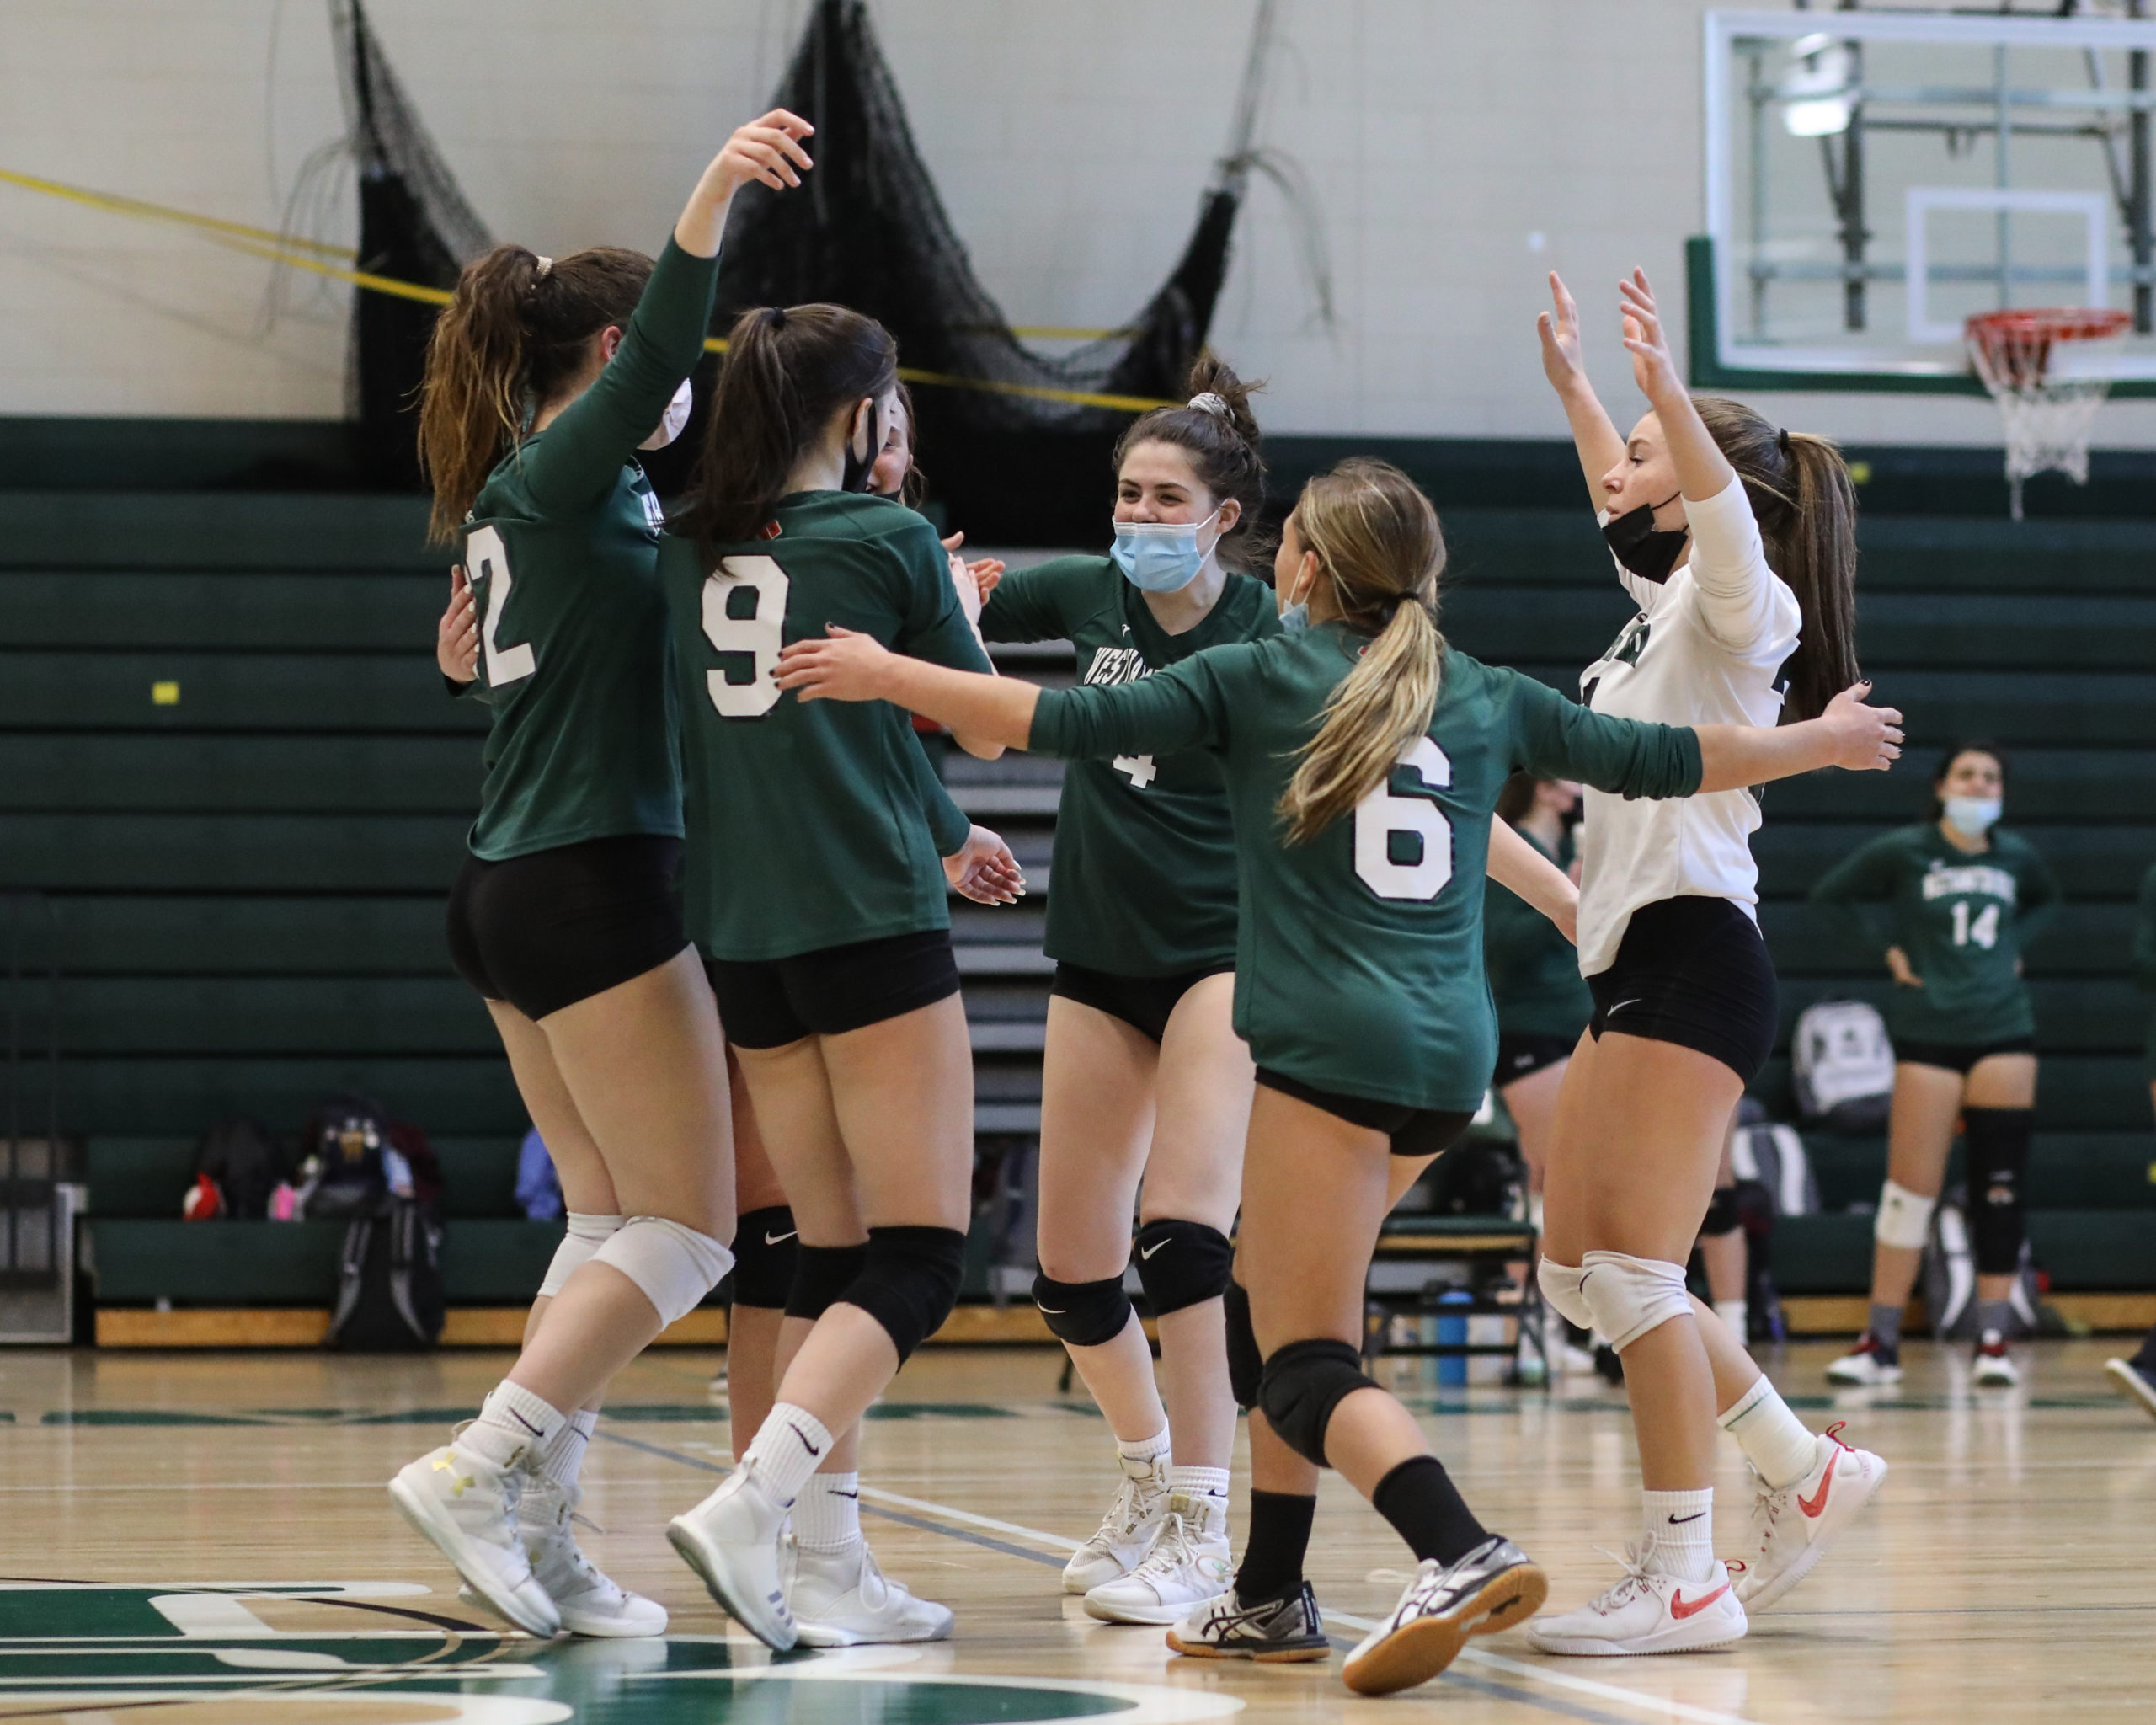 Westhampton Beach's girls volleyball team celebrates its first-set win over Kings Park.